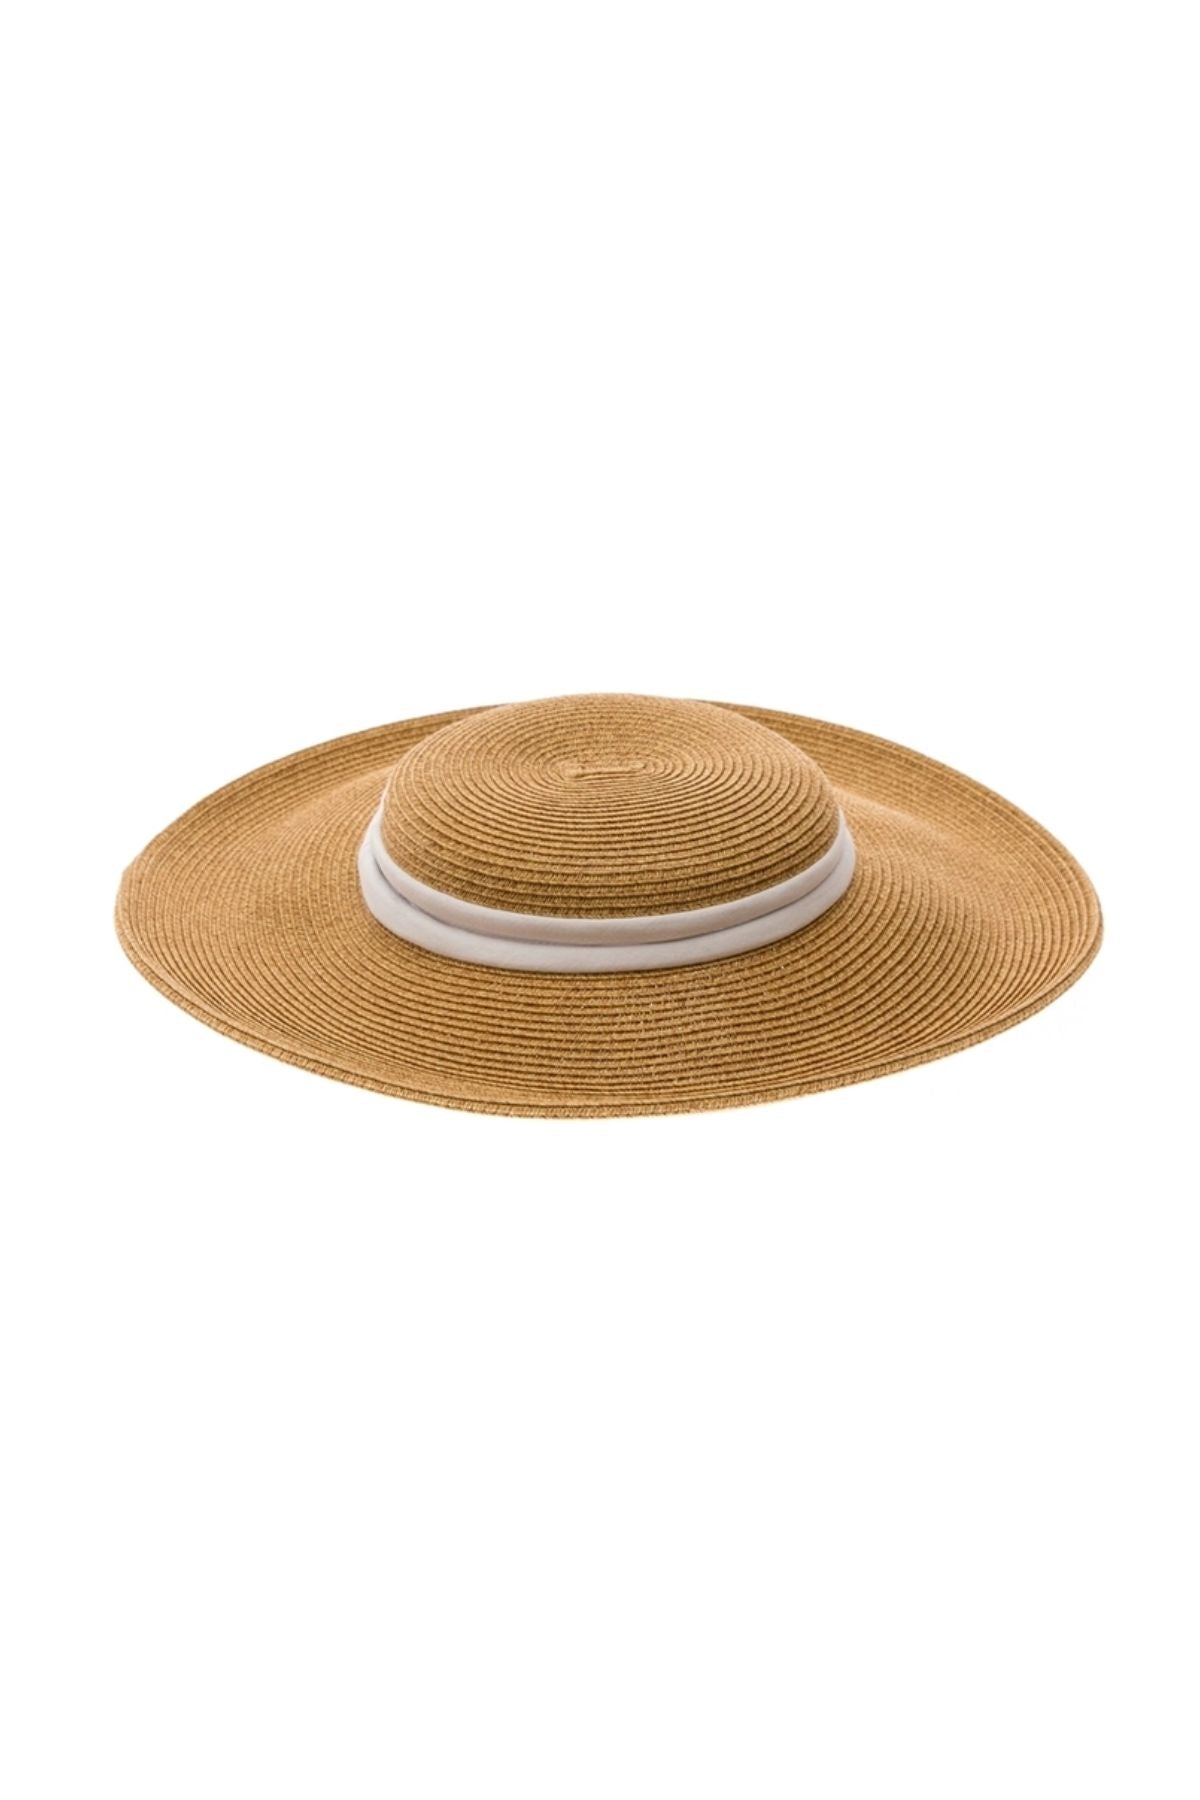 White collapsible straw sun hat